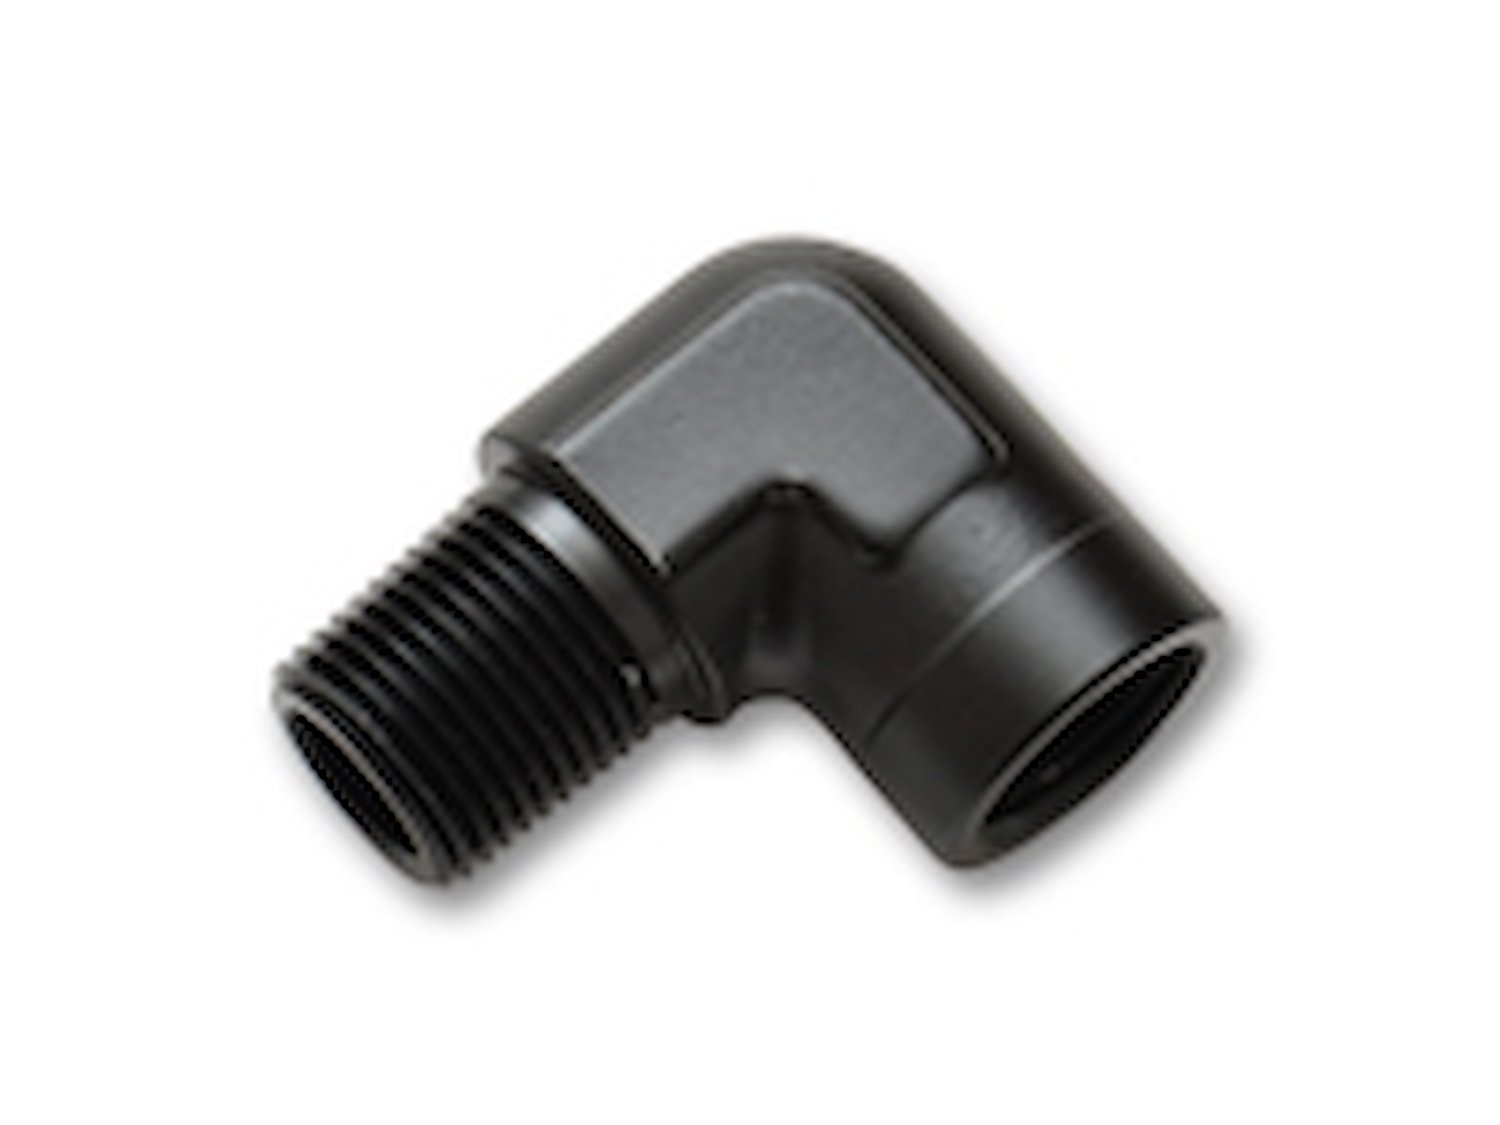 90 Degree Female NPT to Male NPT Adapter Fitting [1/2 in. Female NPT to 1/2 in. Male NPT, Black]